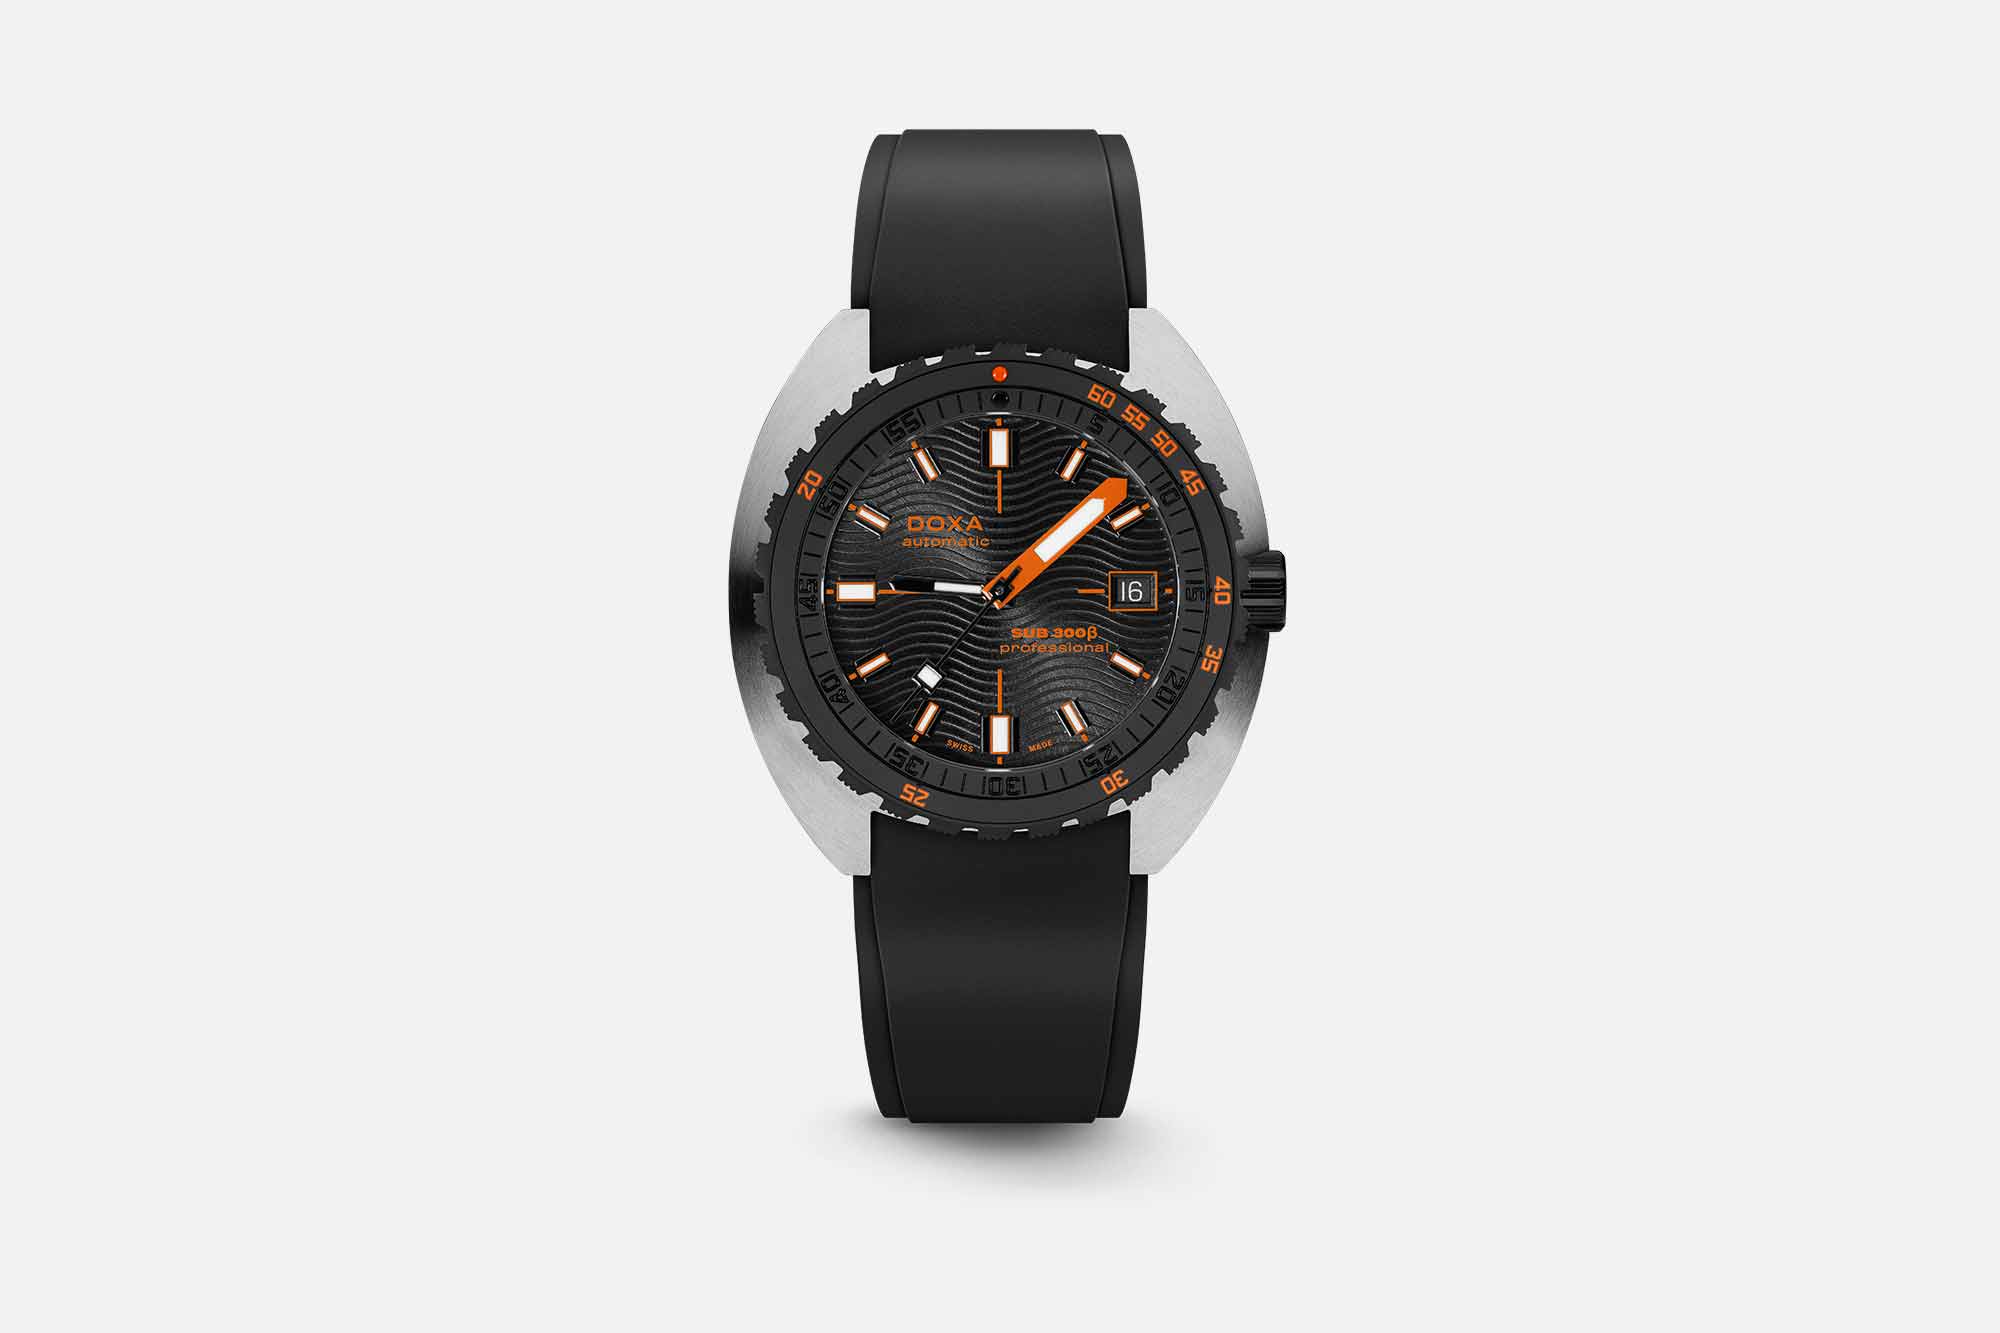 DOXA Adds Some Elegant Touches to their Iconic Dive Watch with the Sub 300β